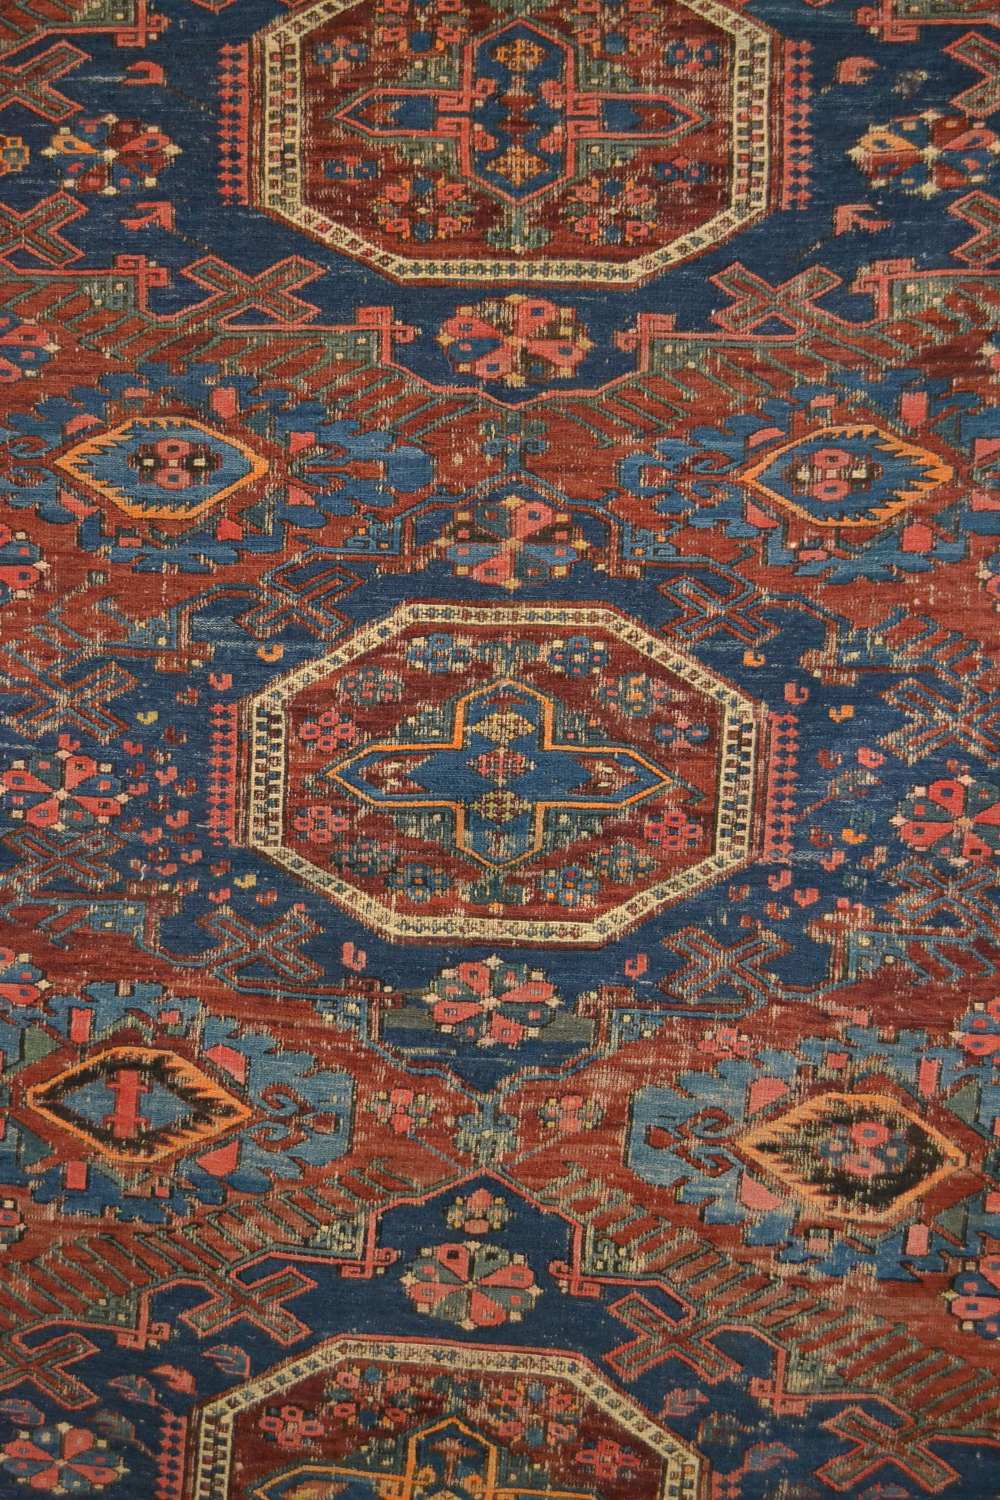 Qashqa’i horse cover, warp-faced plainweave ground with weft wrapping, Fars, south west Persia, - Image 5 of 8